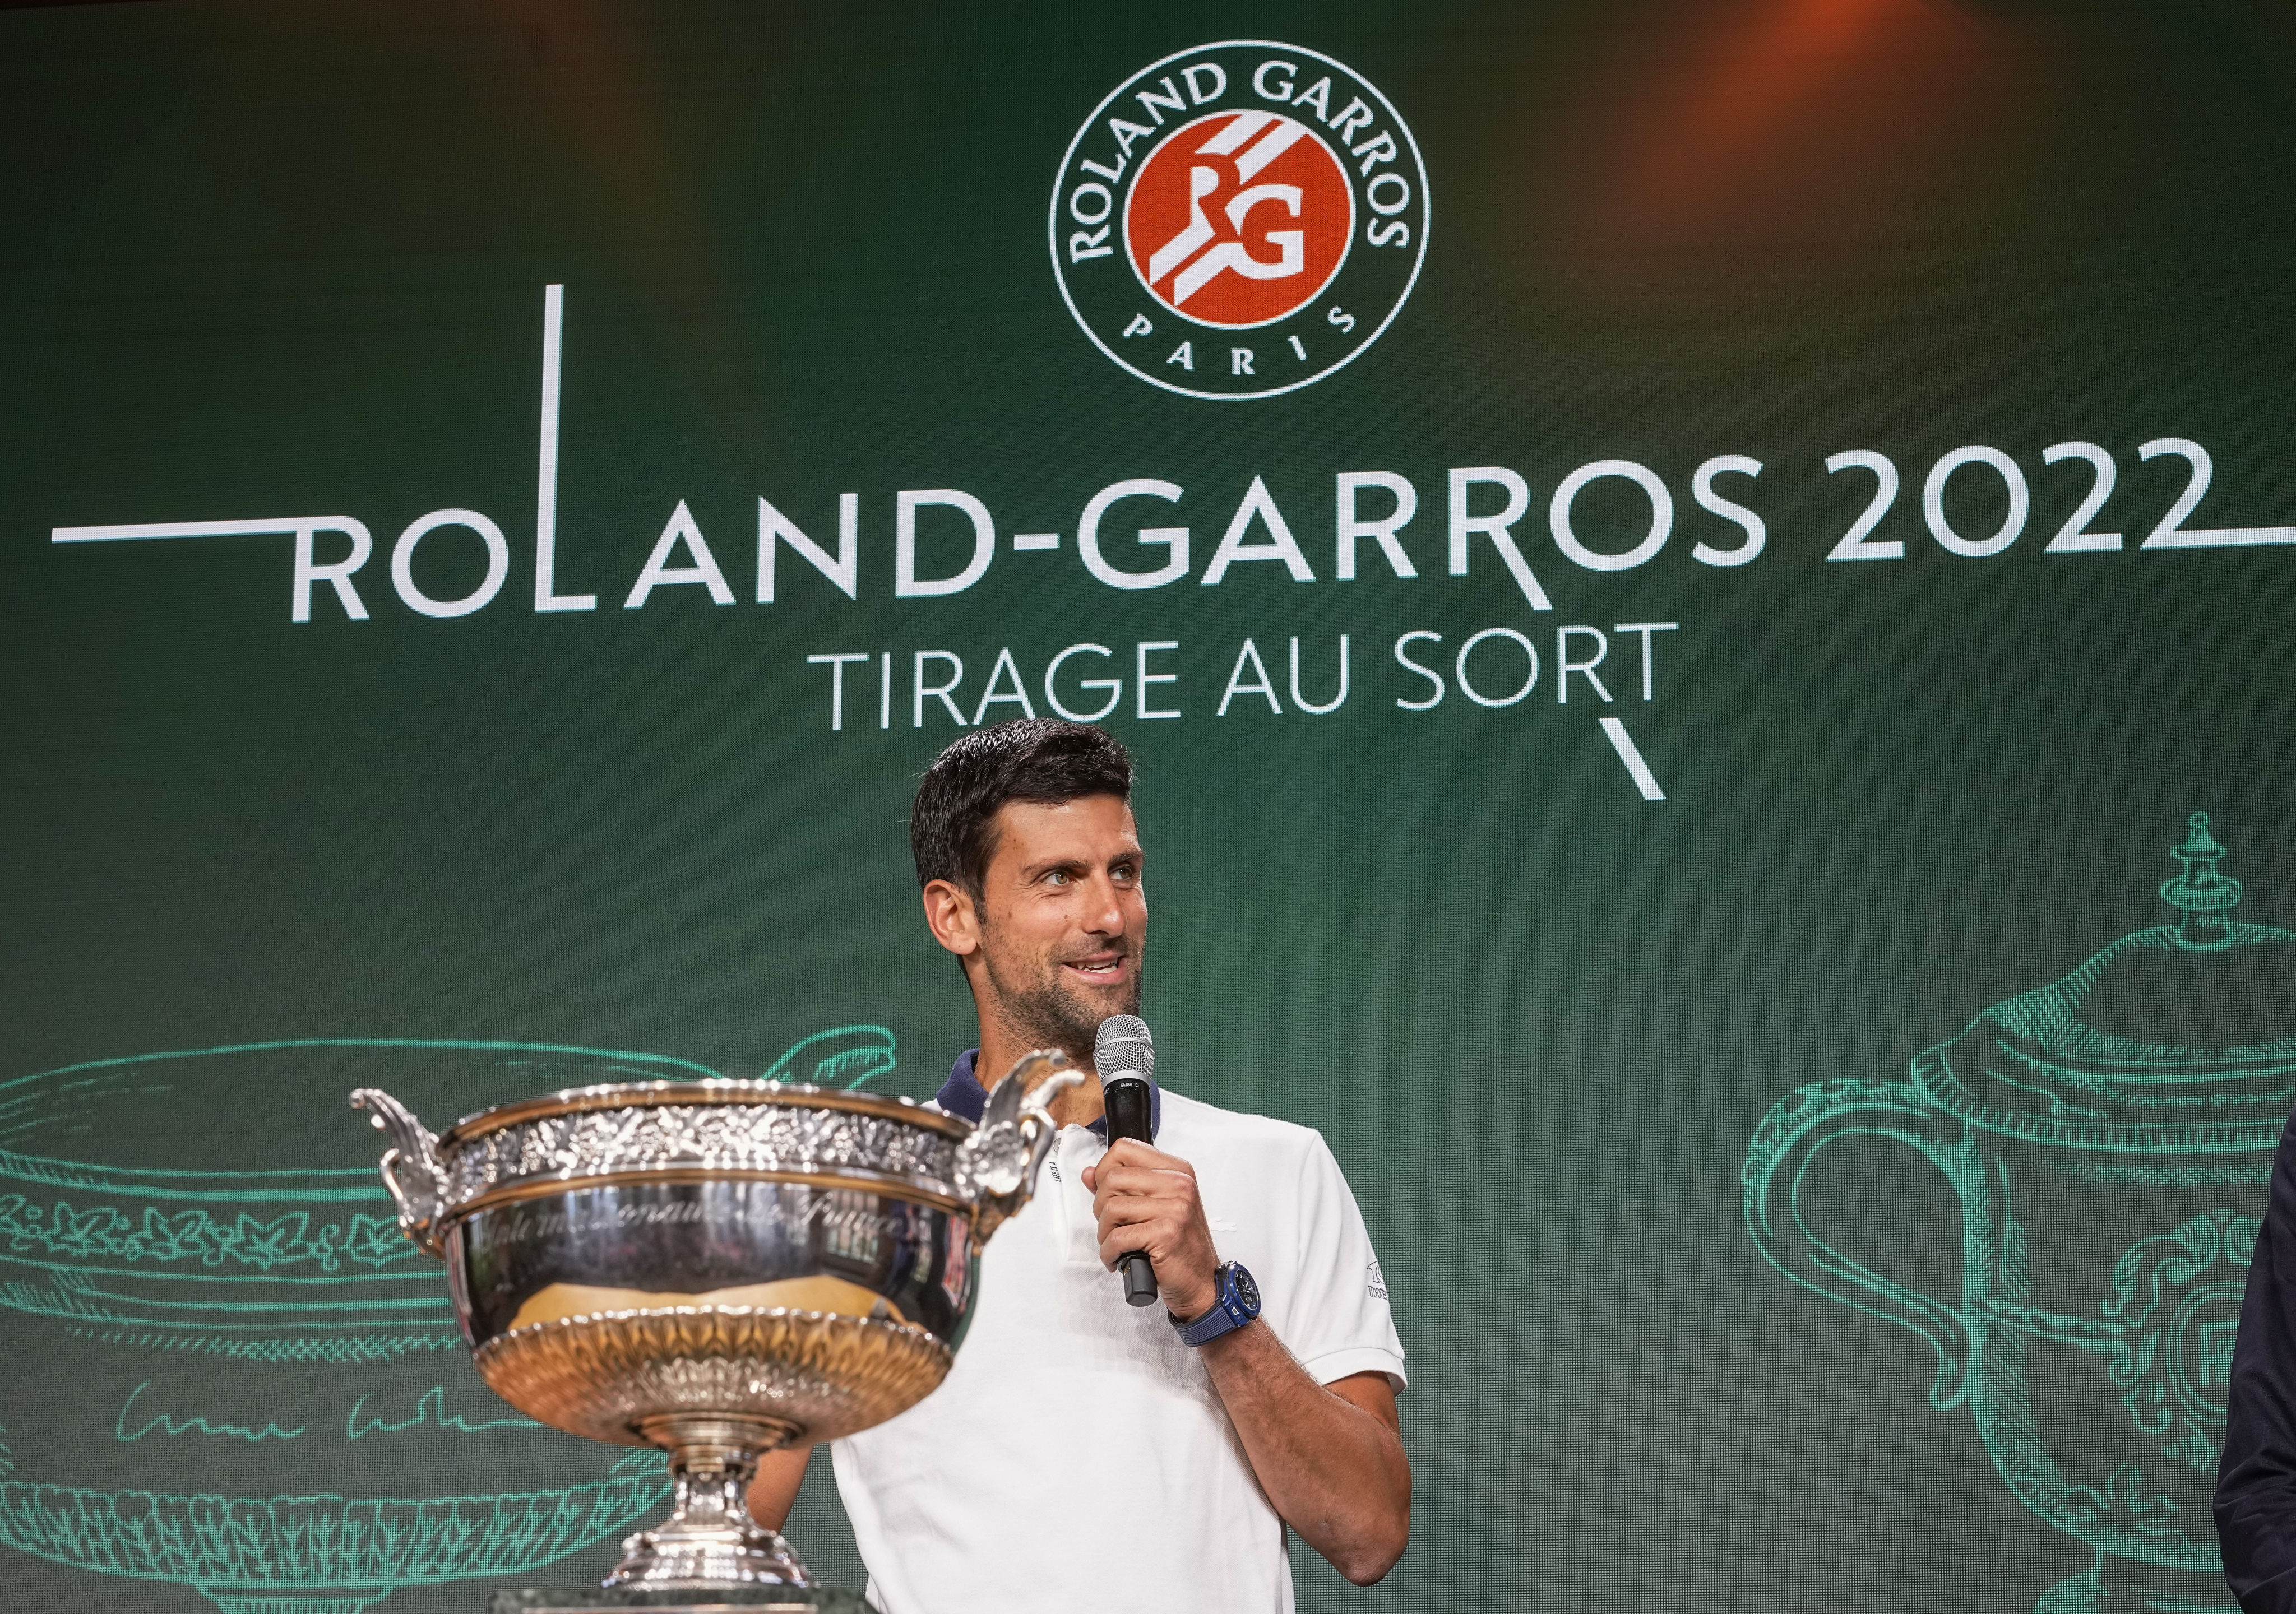 French Open draw puts Djokovic and Nadal on course to meet in quarter-finals, Alcaraz could face winner in last 4 South China Morning Post